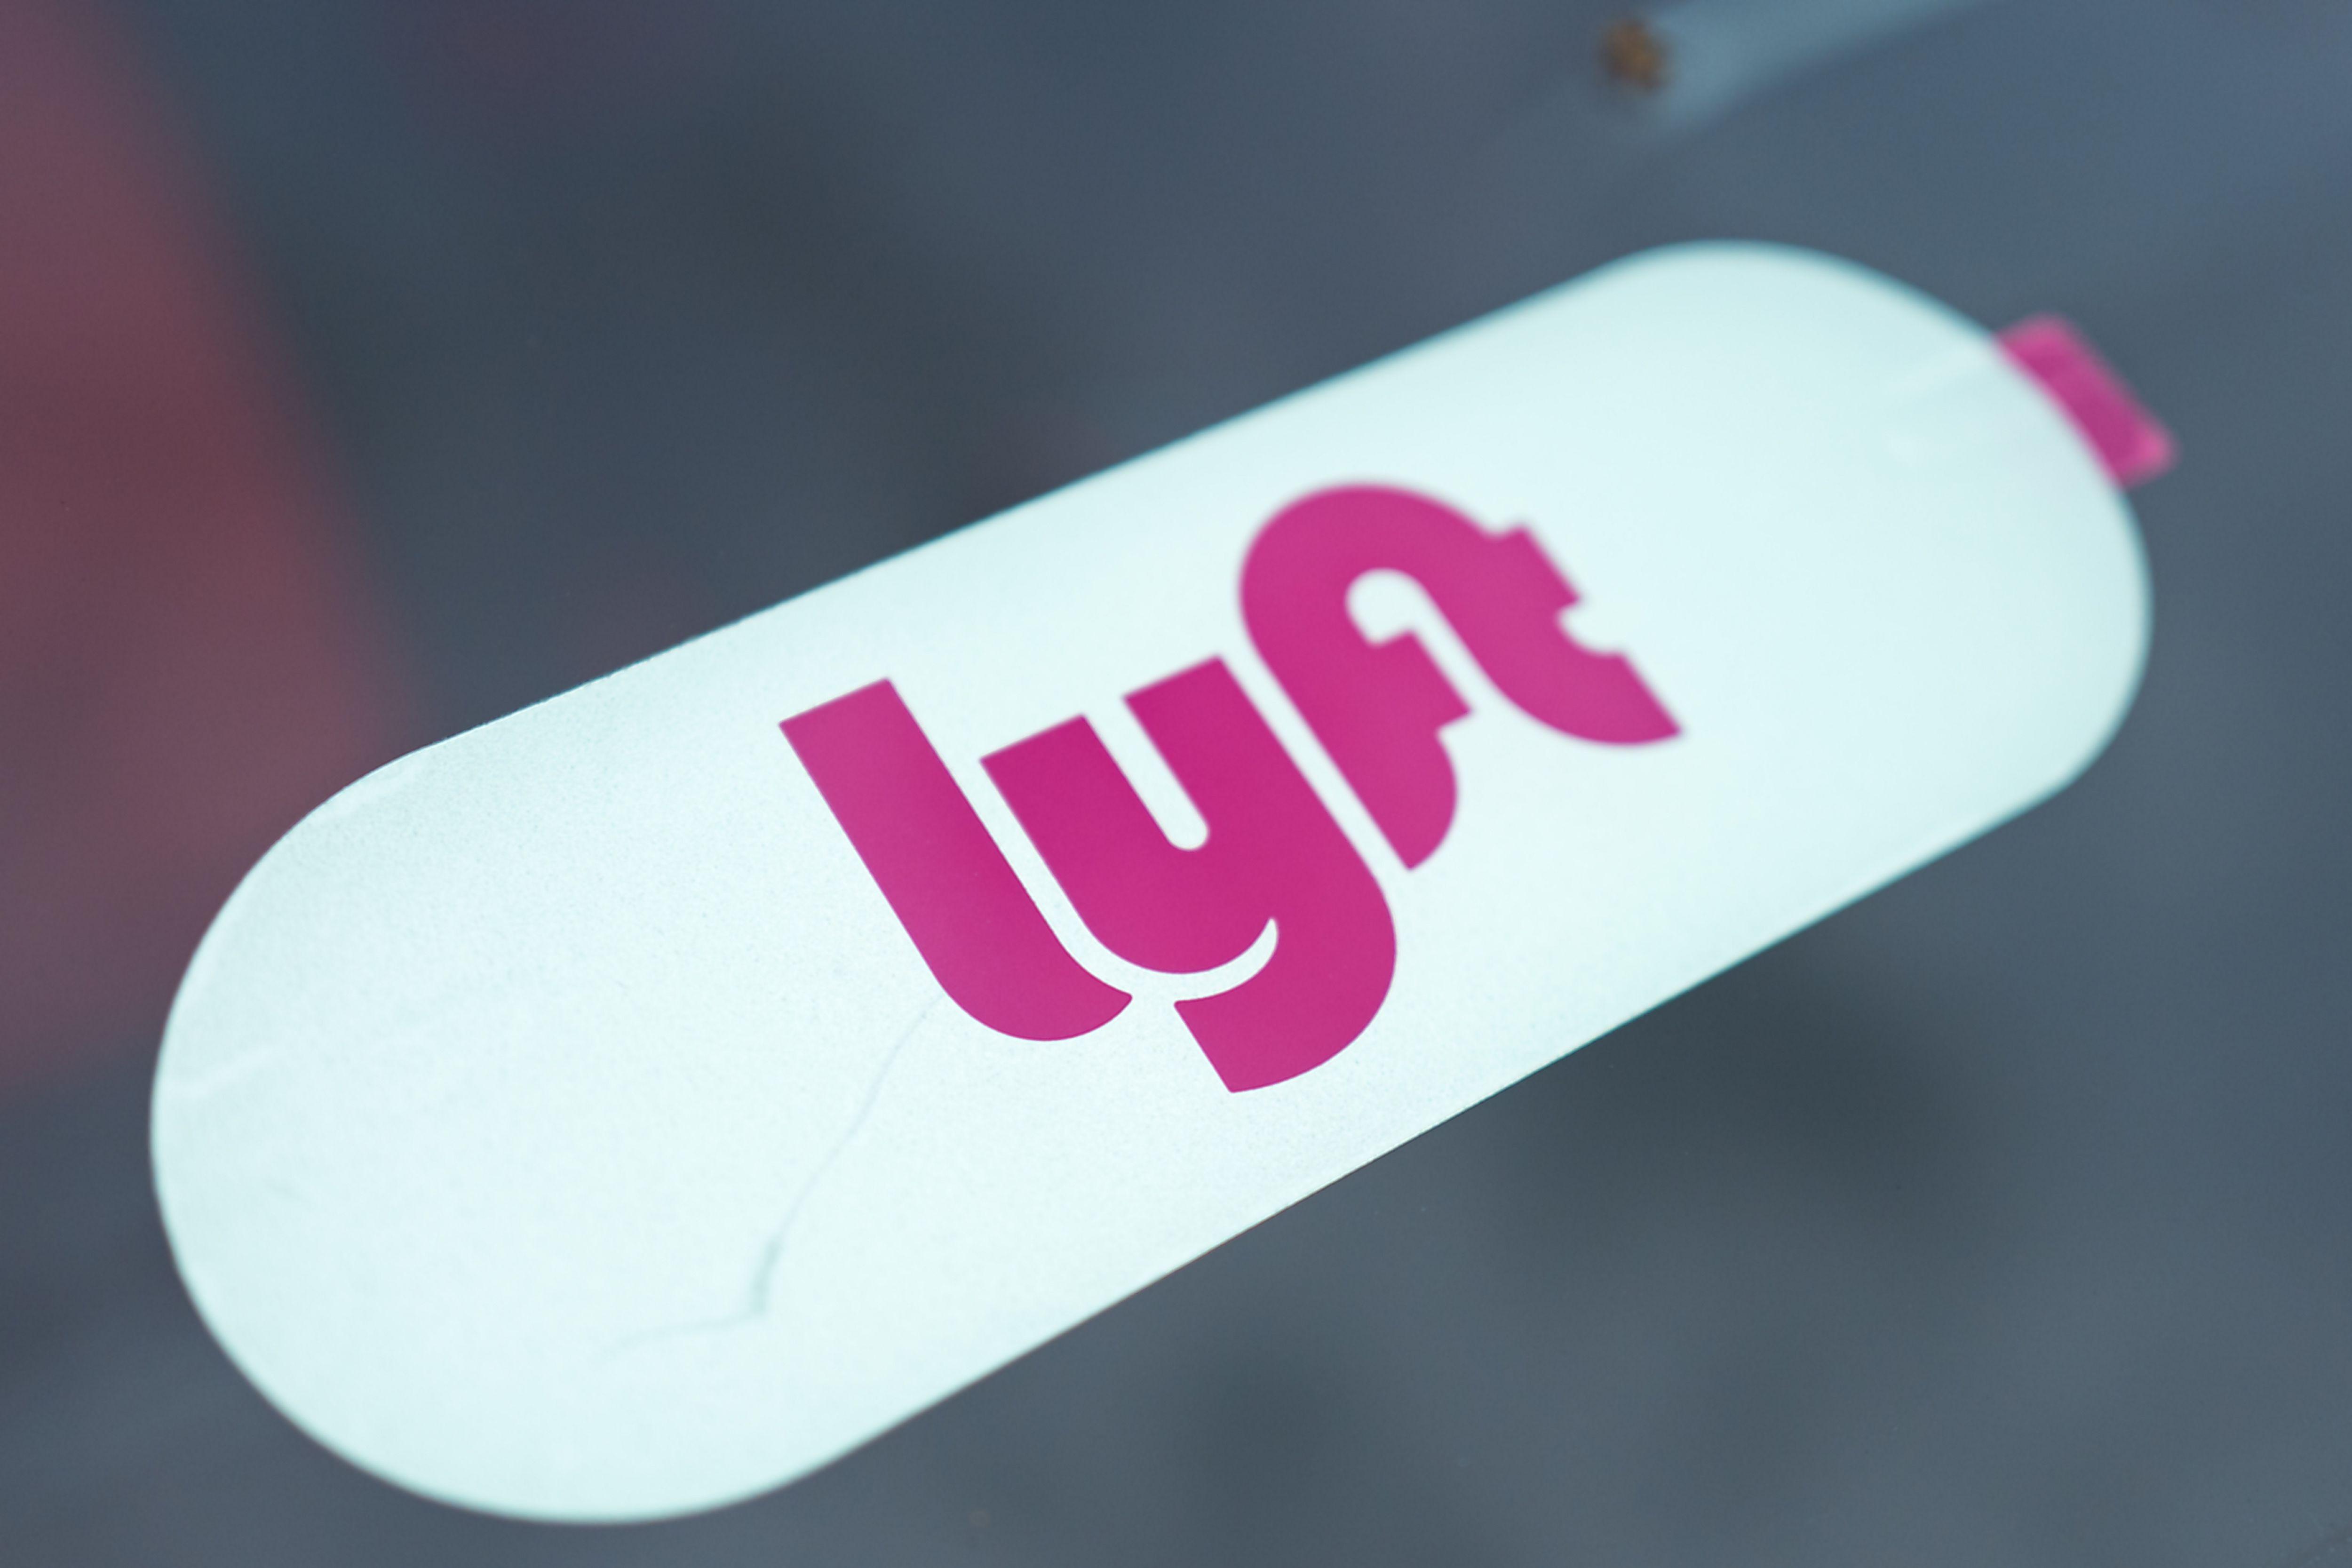 Lyft Ride Sharing Logo - Ride-Sharing Service Lyft Has Delivered Its 1 Billionth Ride | Fortune